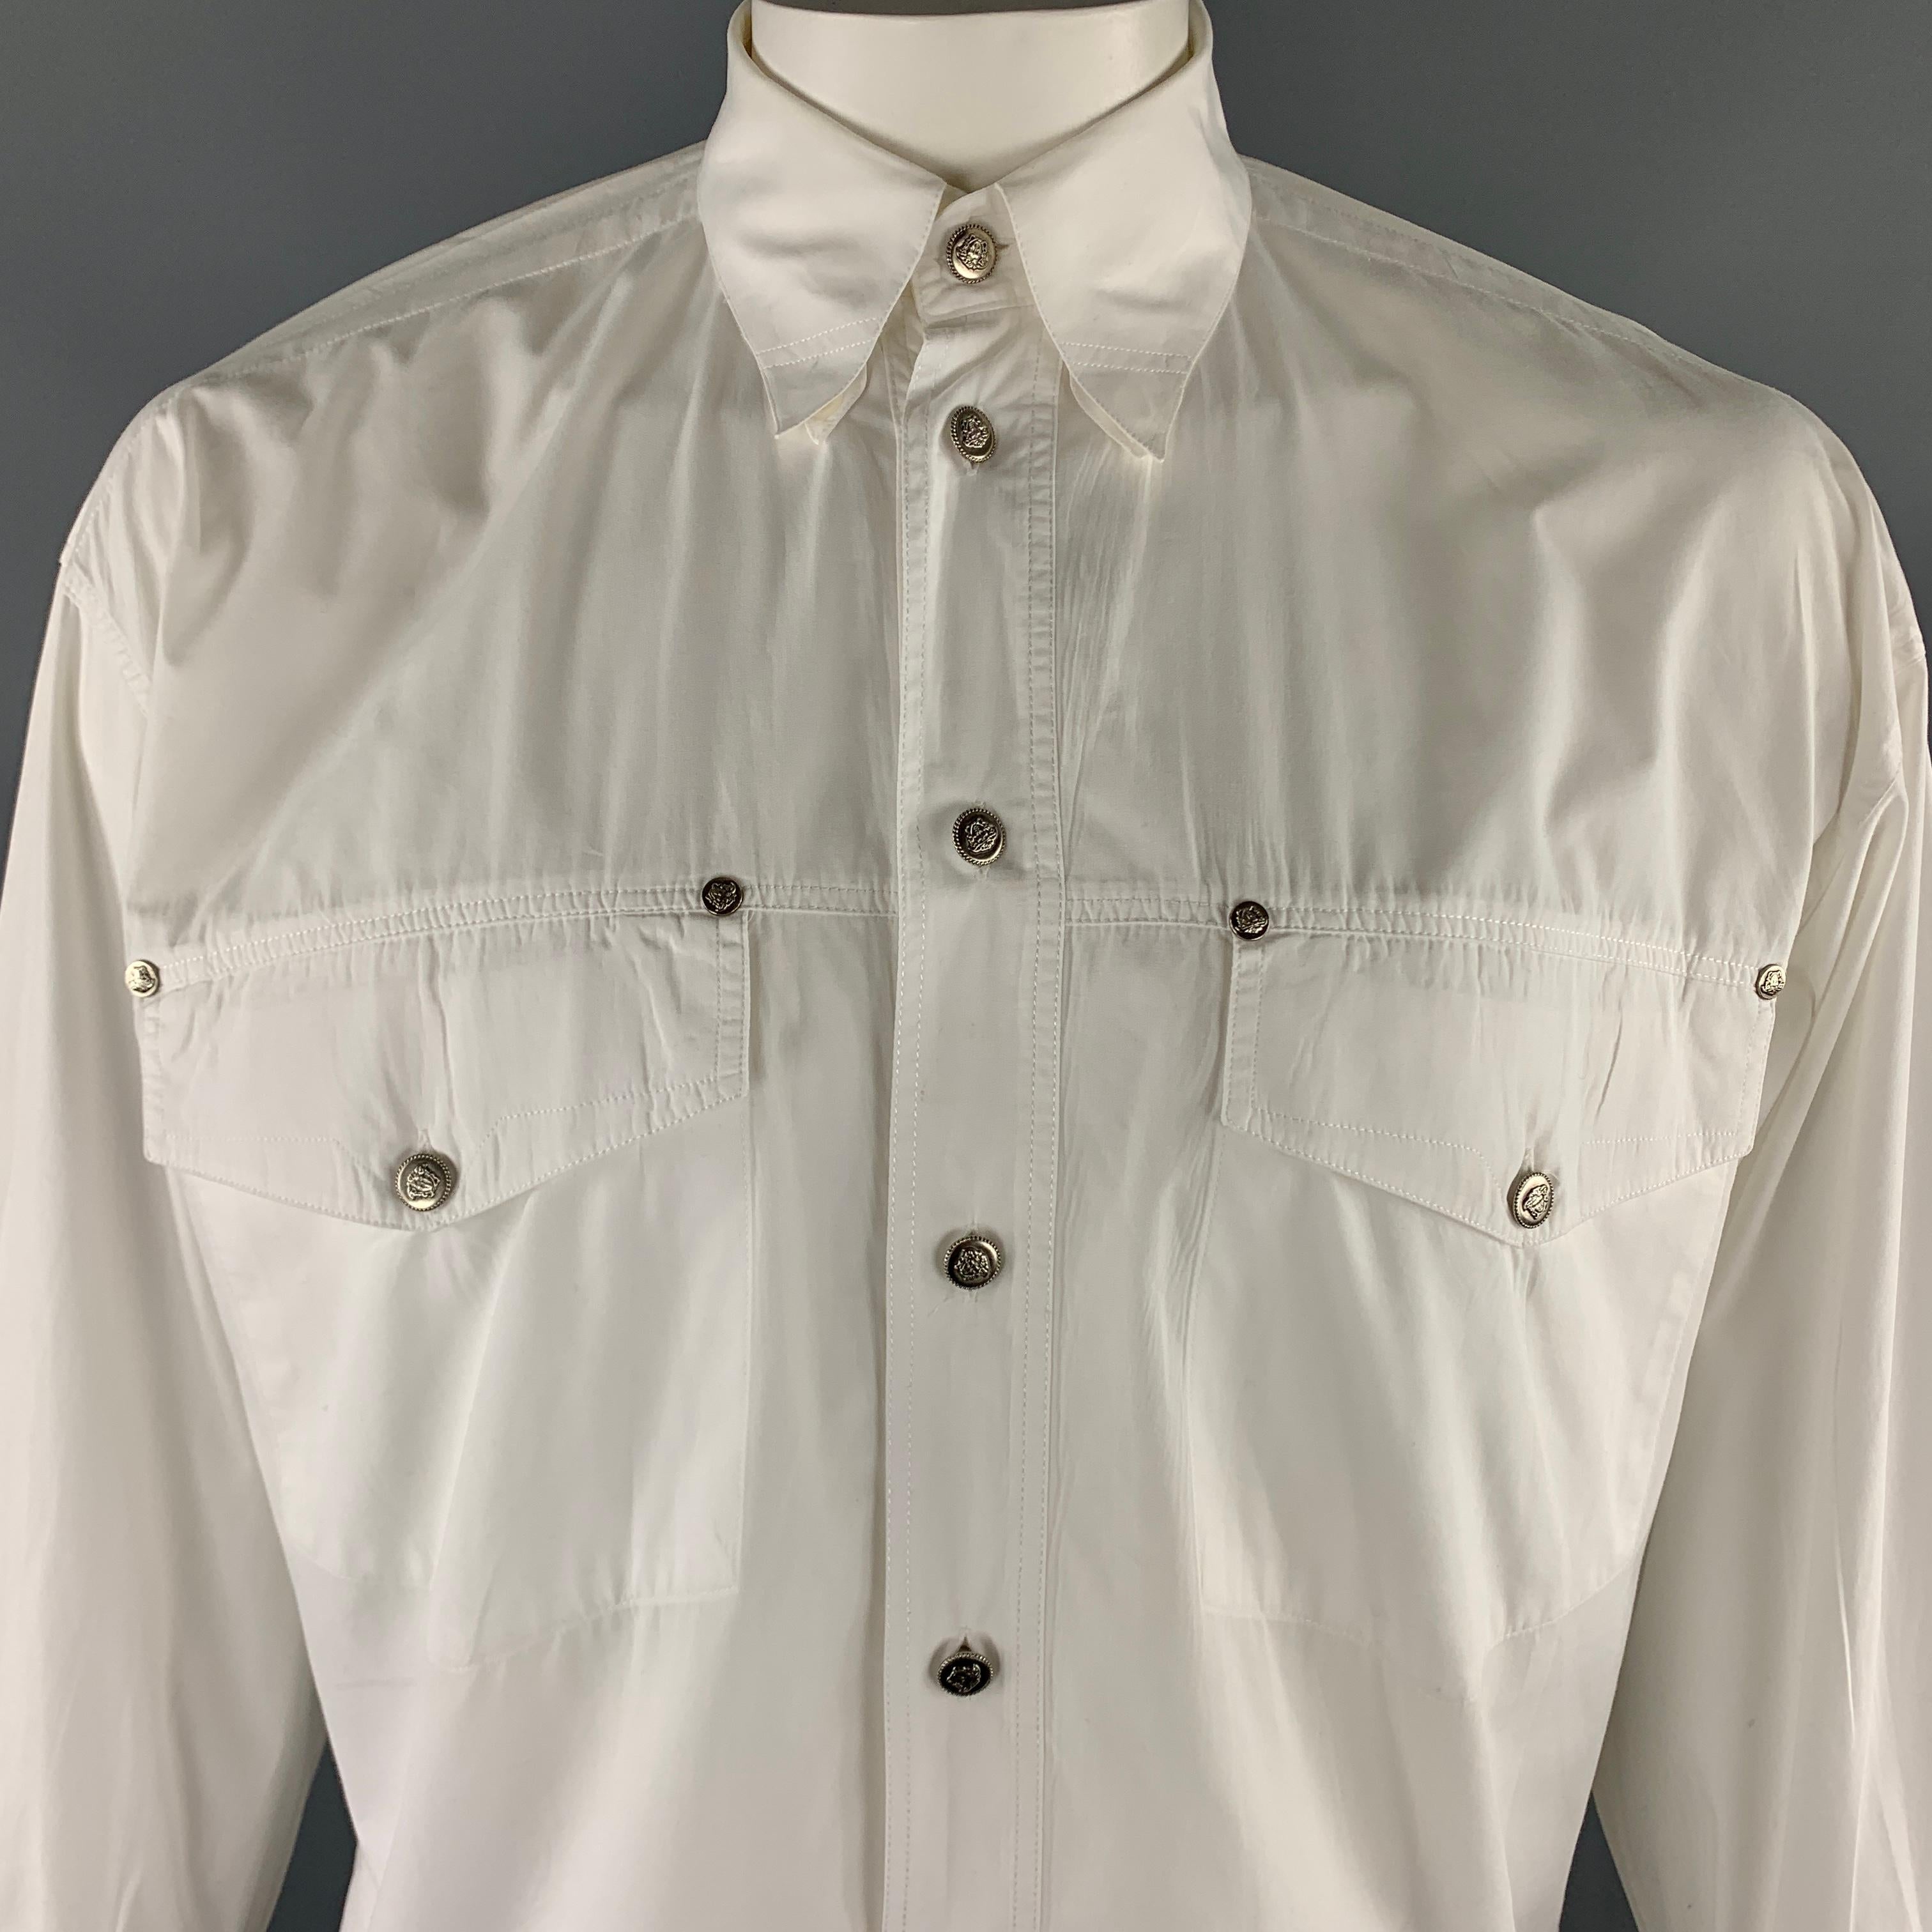 Vintage VERSACE JEANS COUTURE jacket comes in a solid white cotton material, featuring a buttoned front, patch pockets, buttoned cuffs, and silver tone metal medusa embossed buttons. As is. Made in Italy.  

Very Good Pre-Owned Condition.
Marked: